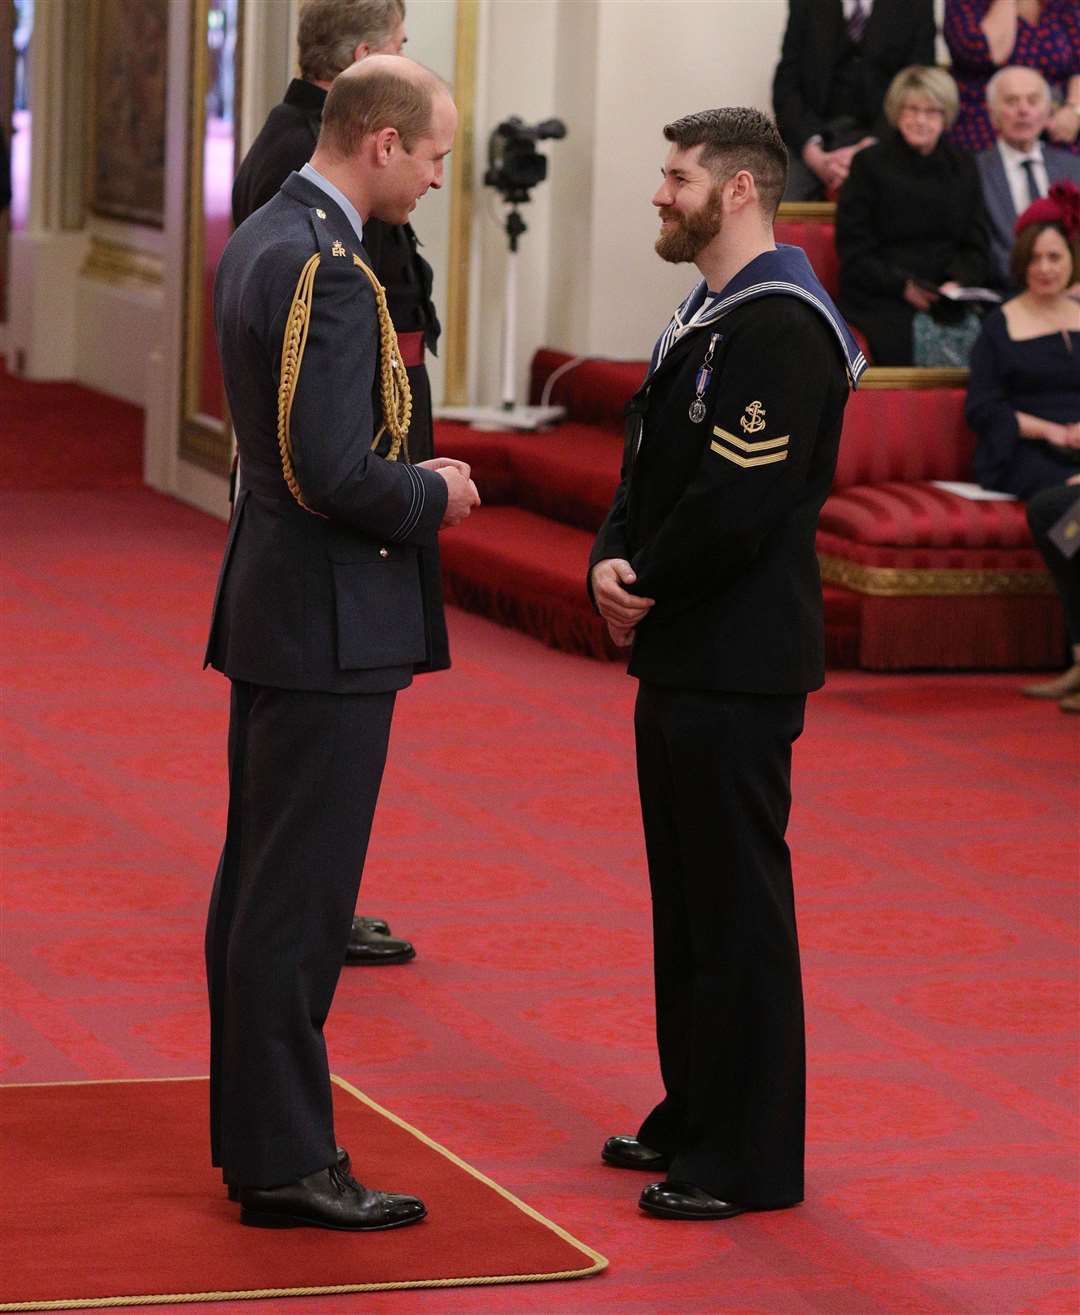 Leading seaman David Groves, Royal Navy, is decorated with the Queen’s Gallantry Medal by the Duke of Cambridge at Buckingham Palace (PA)